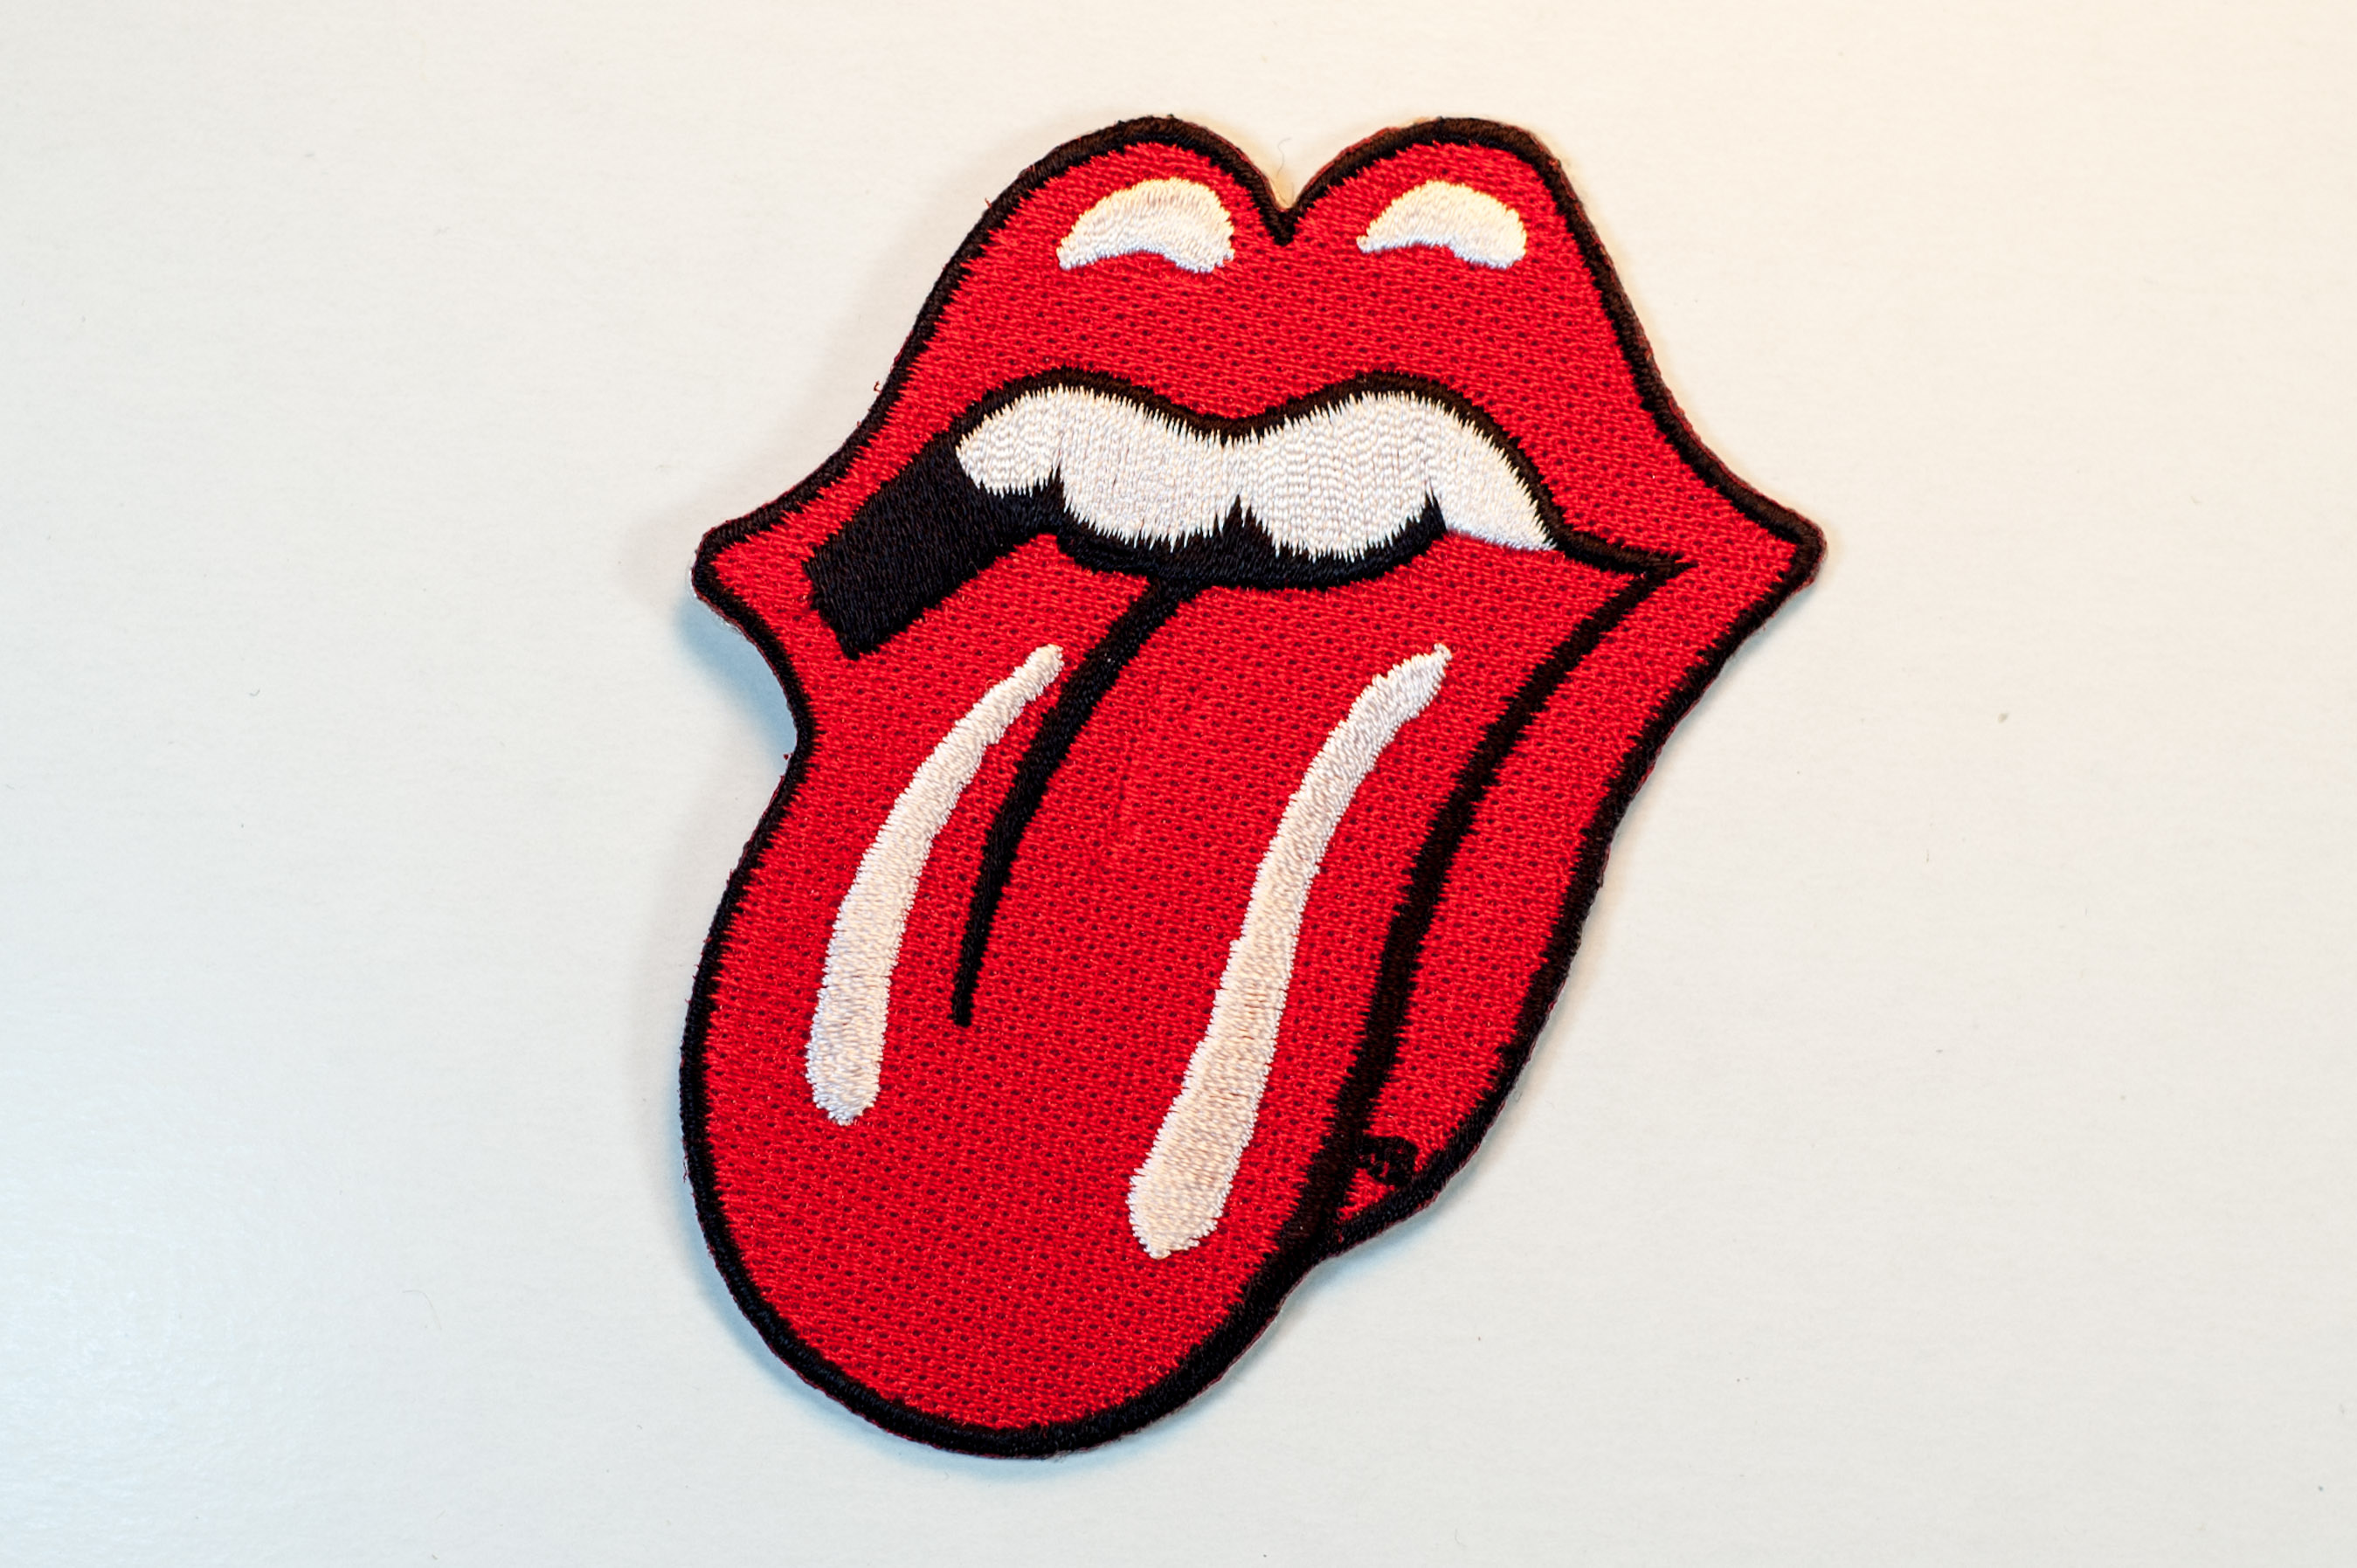 The Rolling Stones Logo Wallpaper Images Pictures   Becuo 2698x1795